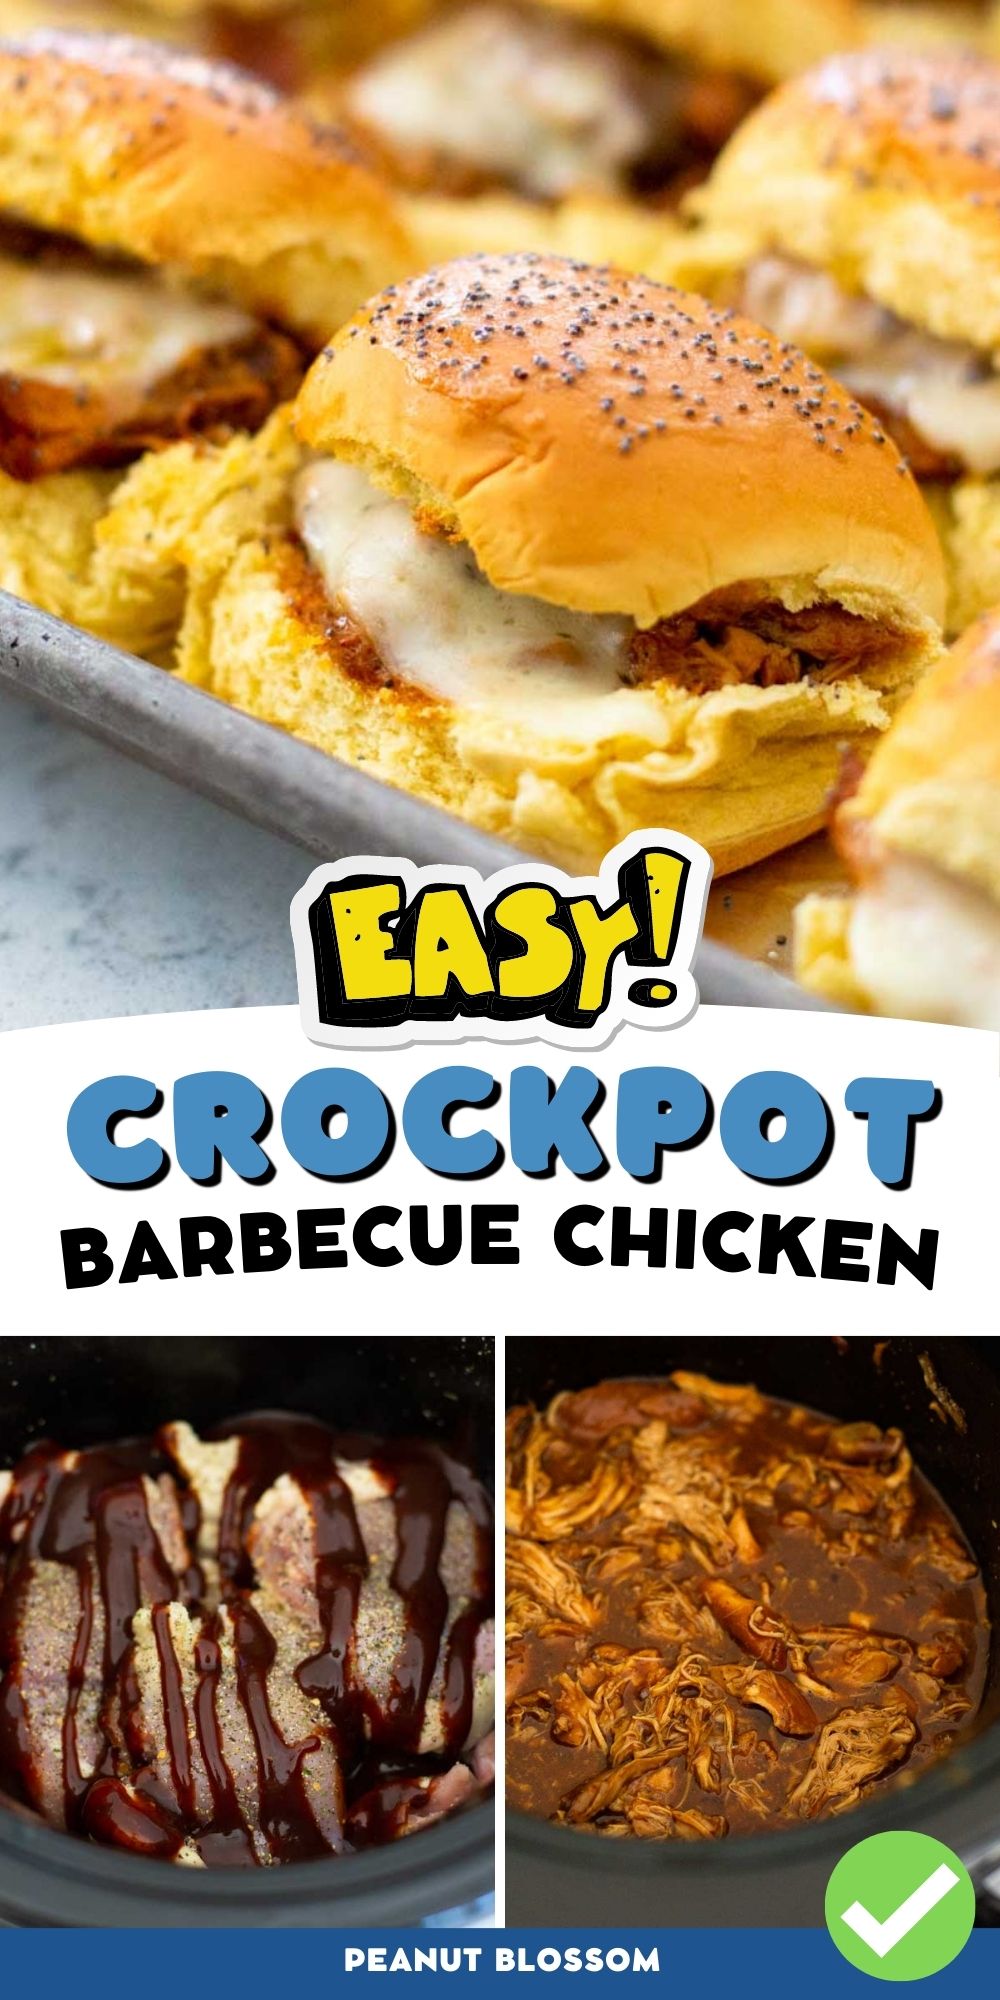 The chicken in the crockpot and then turned into BBQ sliders